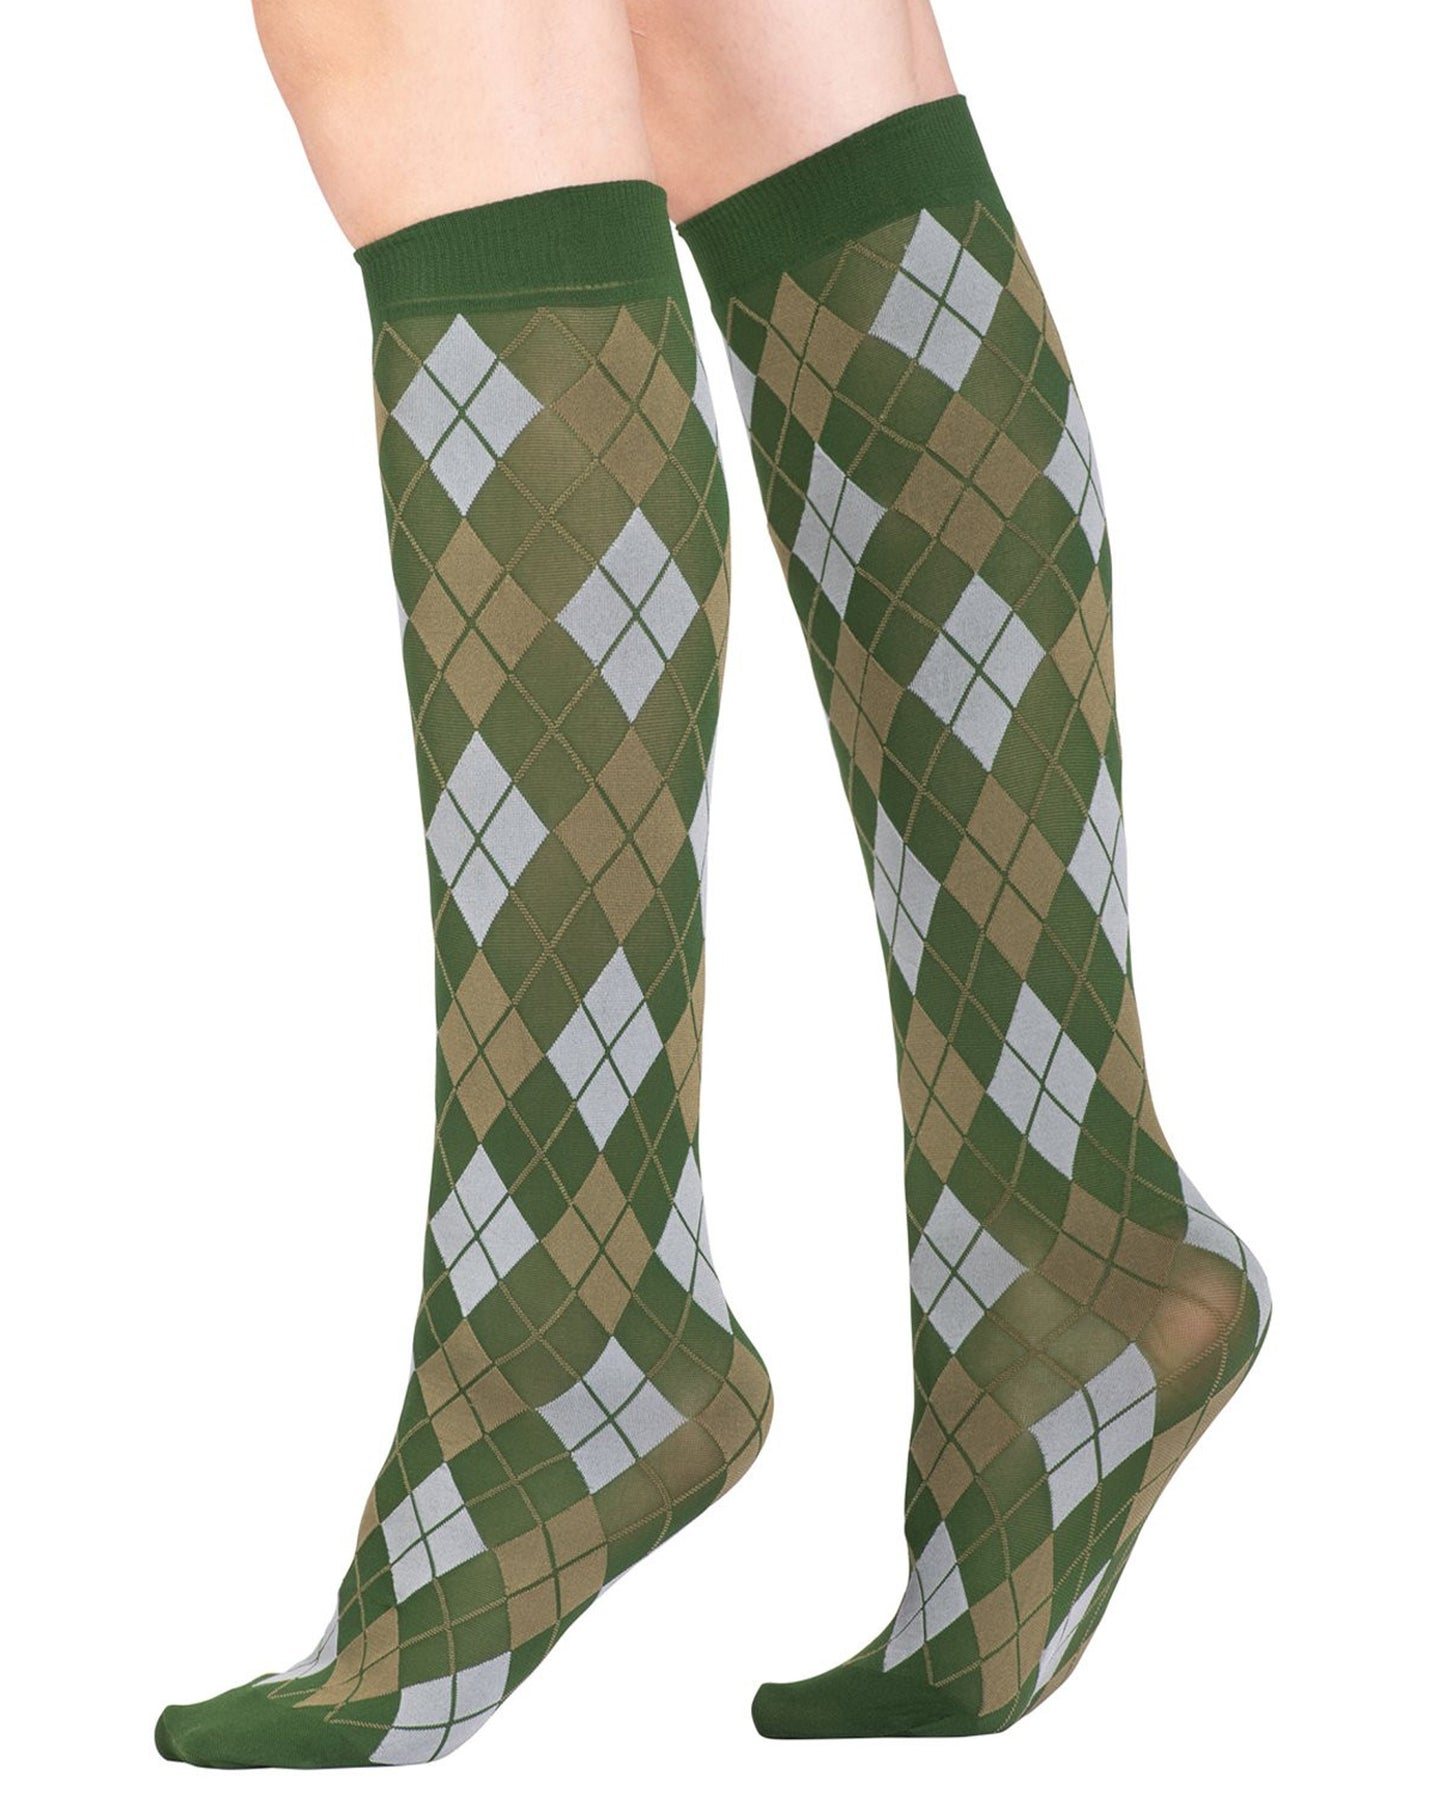 Emilio Cavallini Argyle Socks - Matte olive green opaque fashion knee-high socks with a diamond argyle pattern in khaki green and light grey, deep elasticated cuff and reinforced toe.